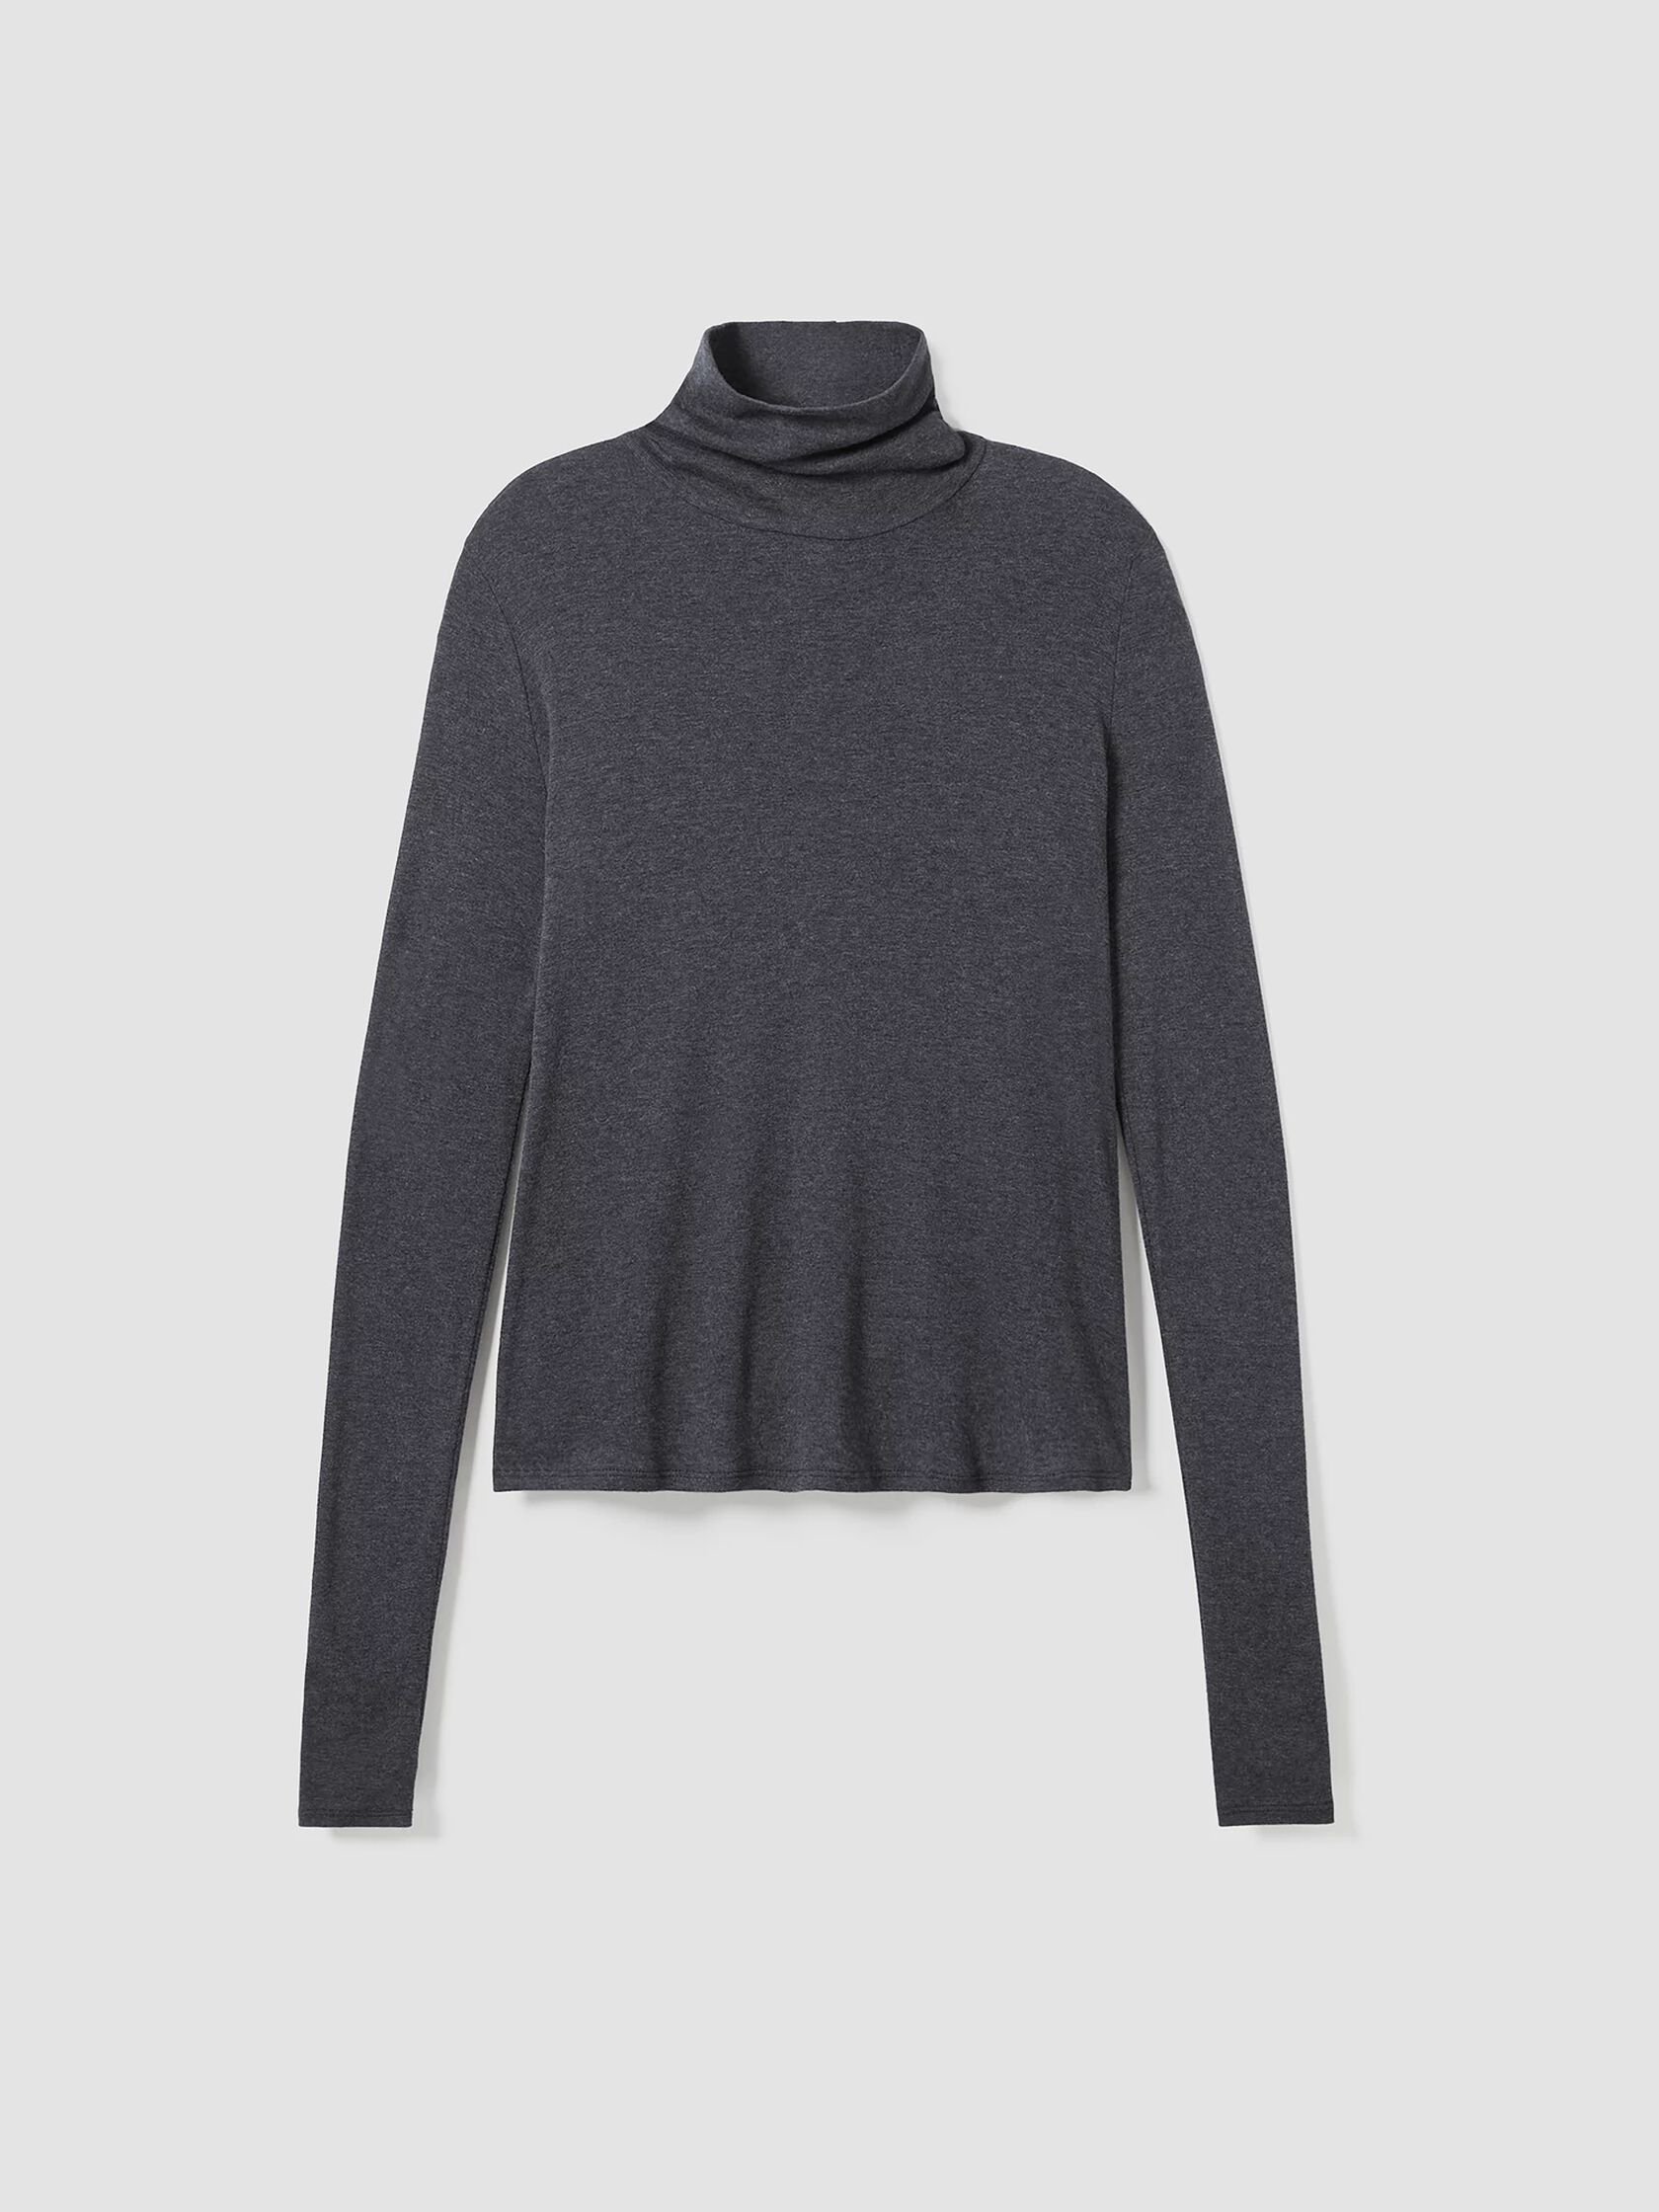 Ribbed Pima Cotton Blend Turtleneck Top | EILEEN FISHER